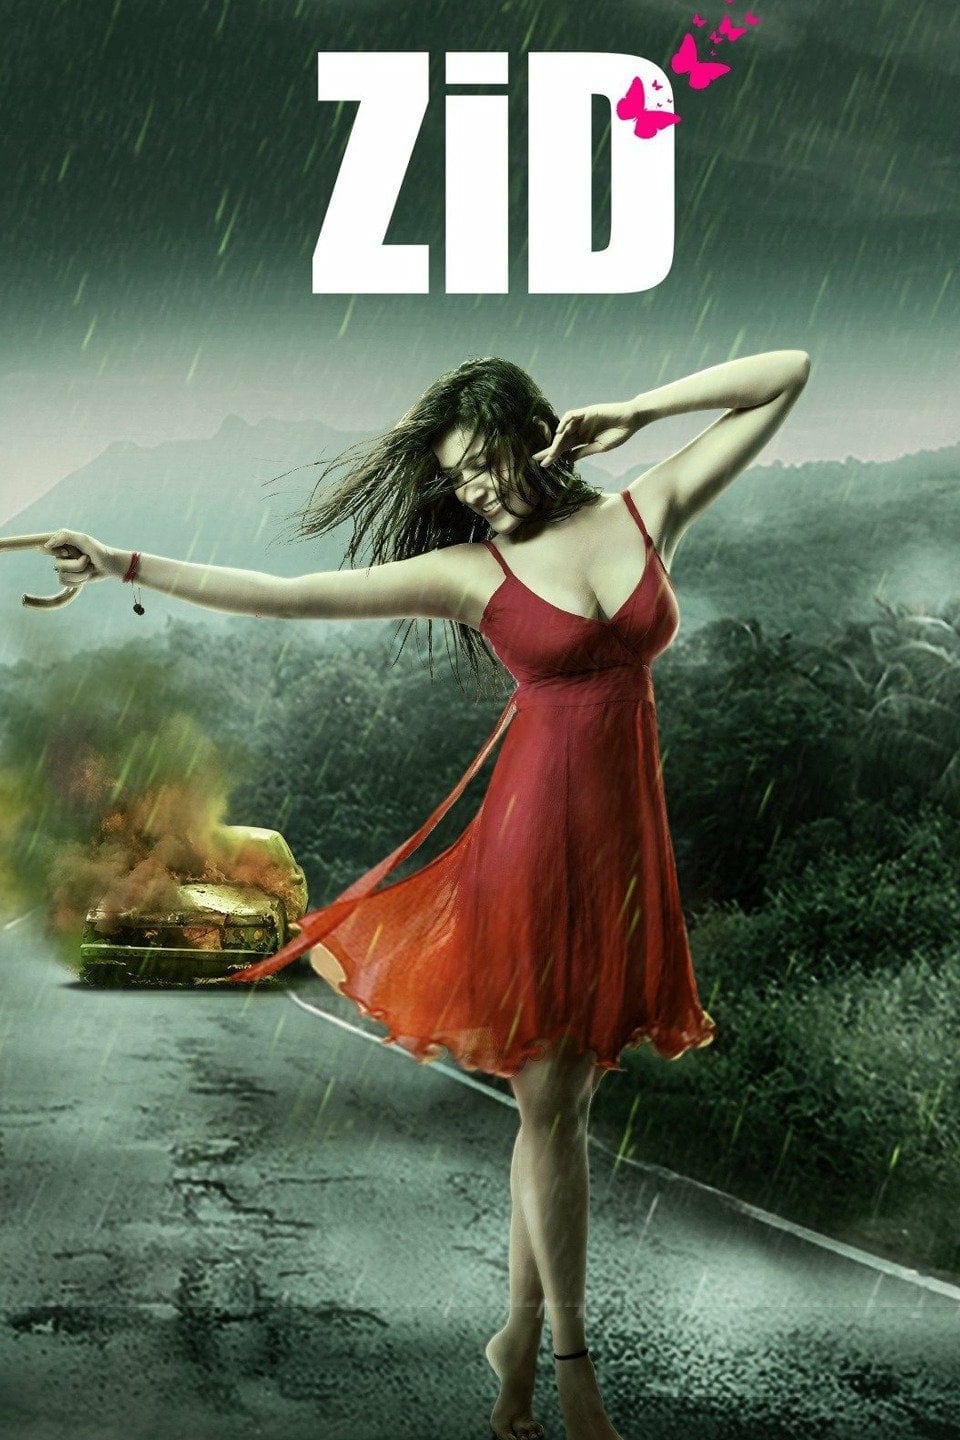 Poster for the movie "Zid"